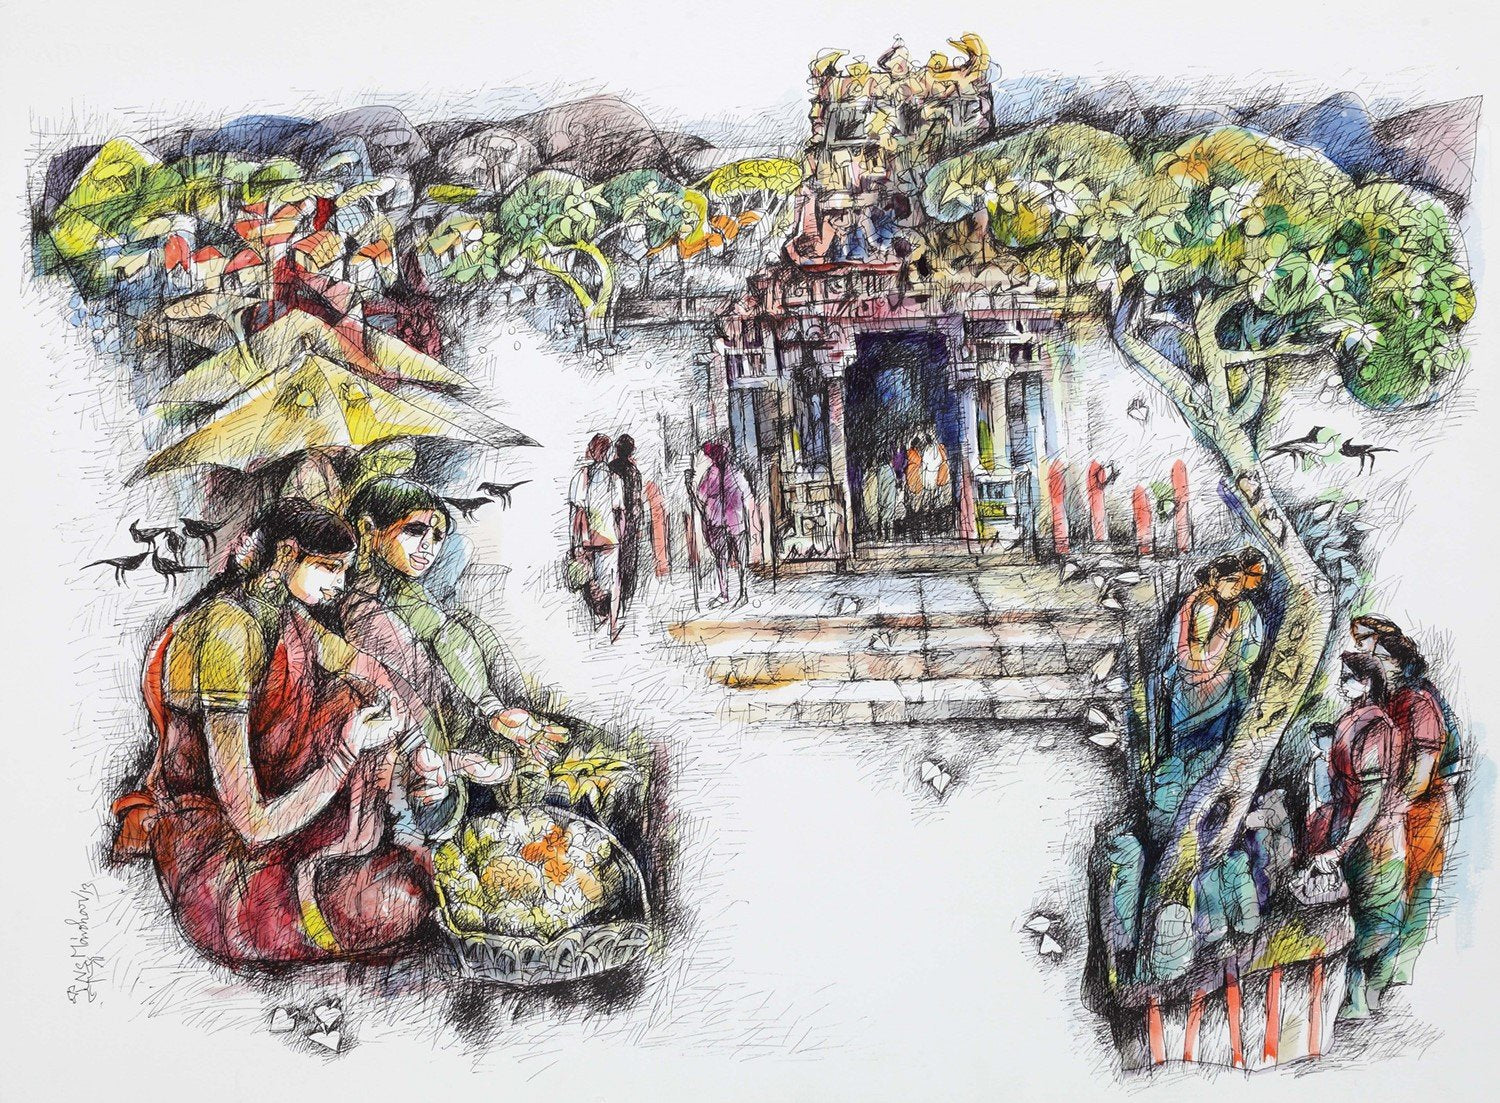 Pastoral Life 9|N.S. Manohar- Water colour on Board, 2013, 22 x 30 inches